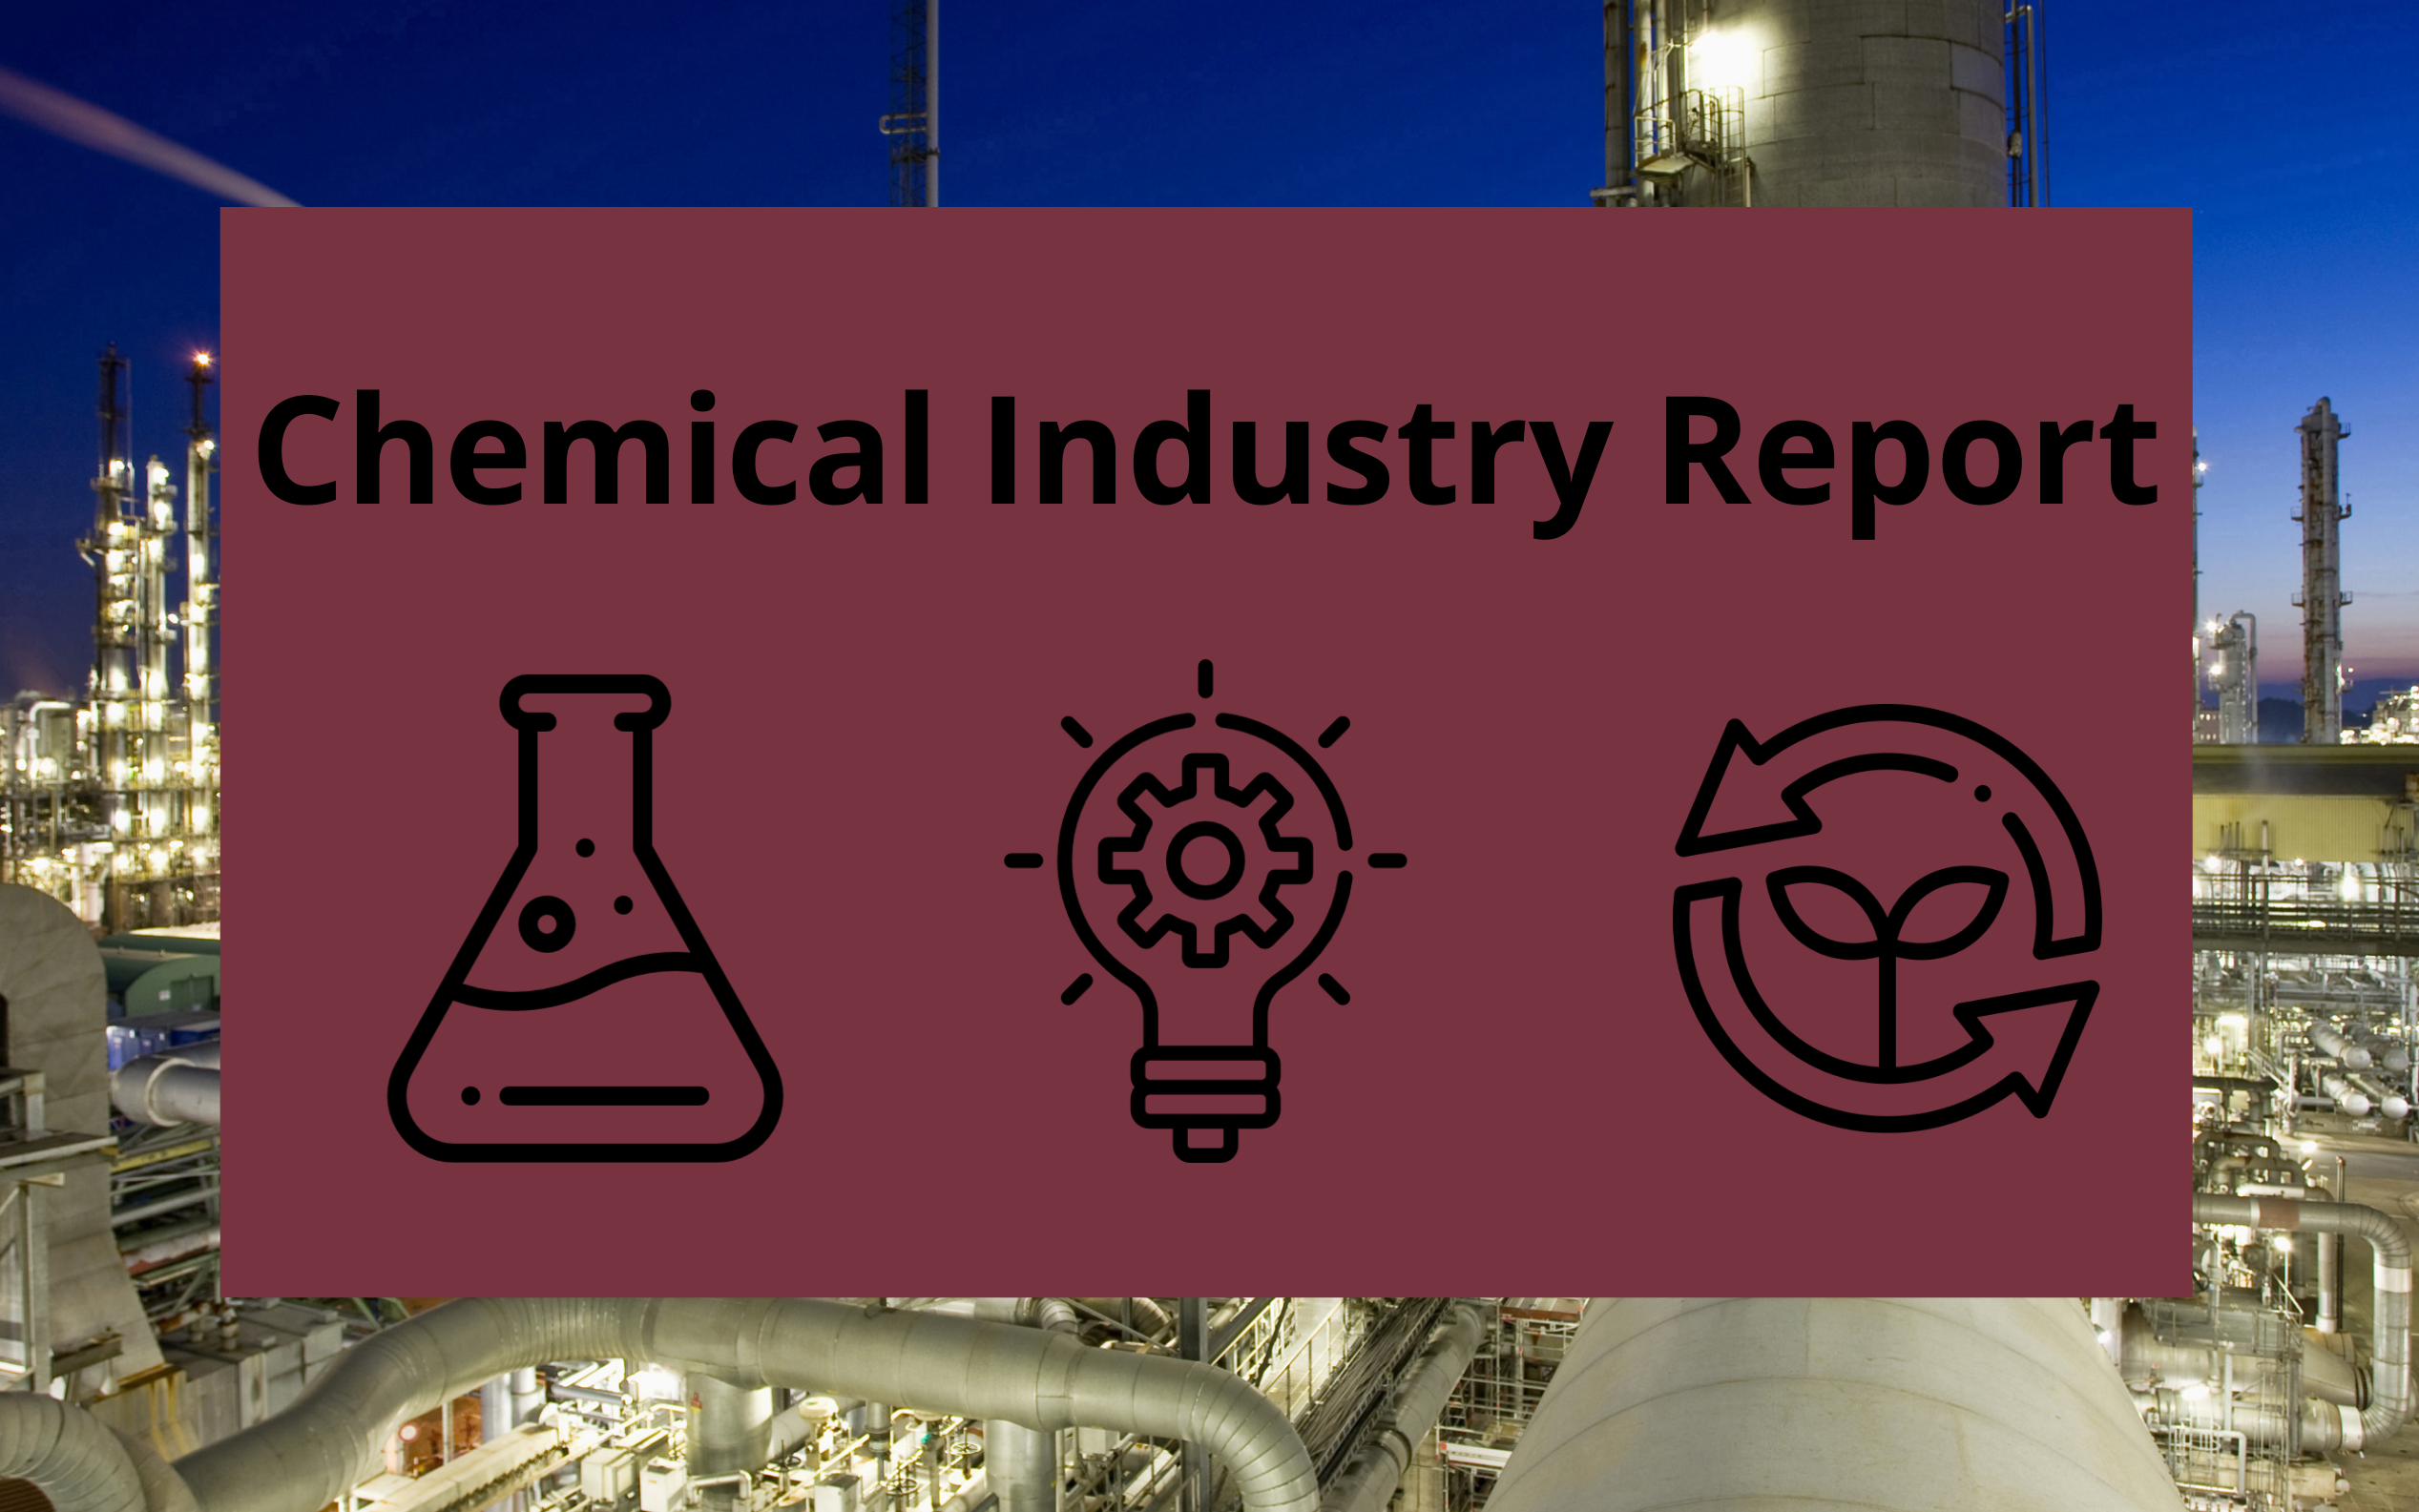 Definition: Fine and Specialty Chemicals Segment